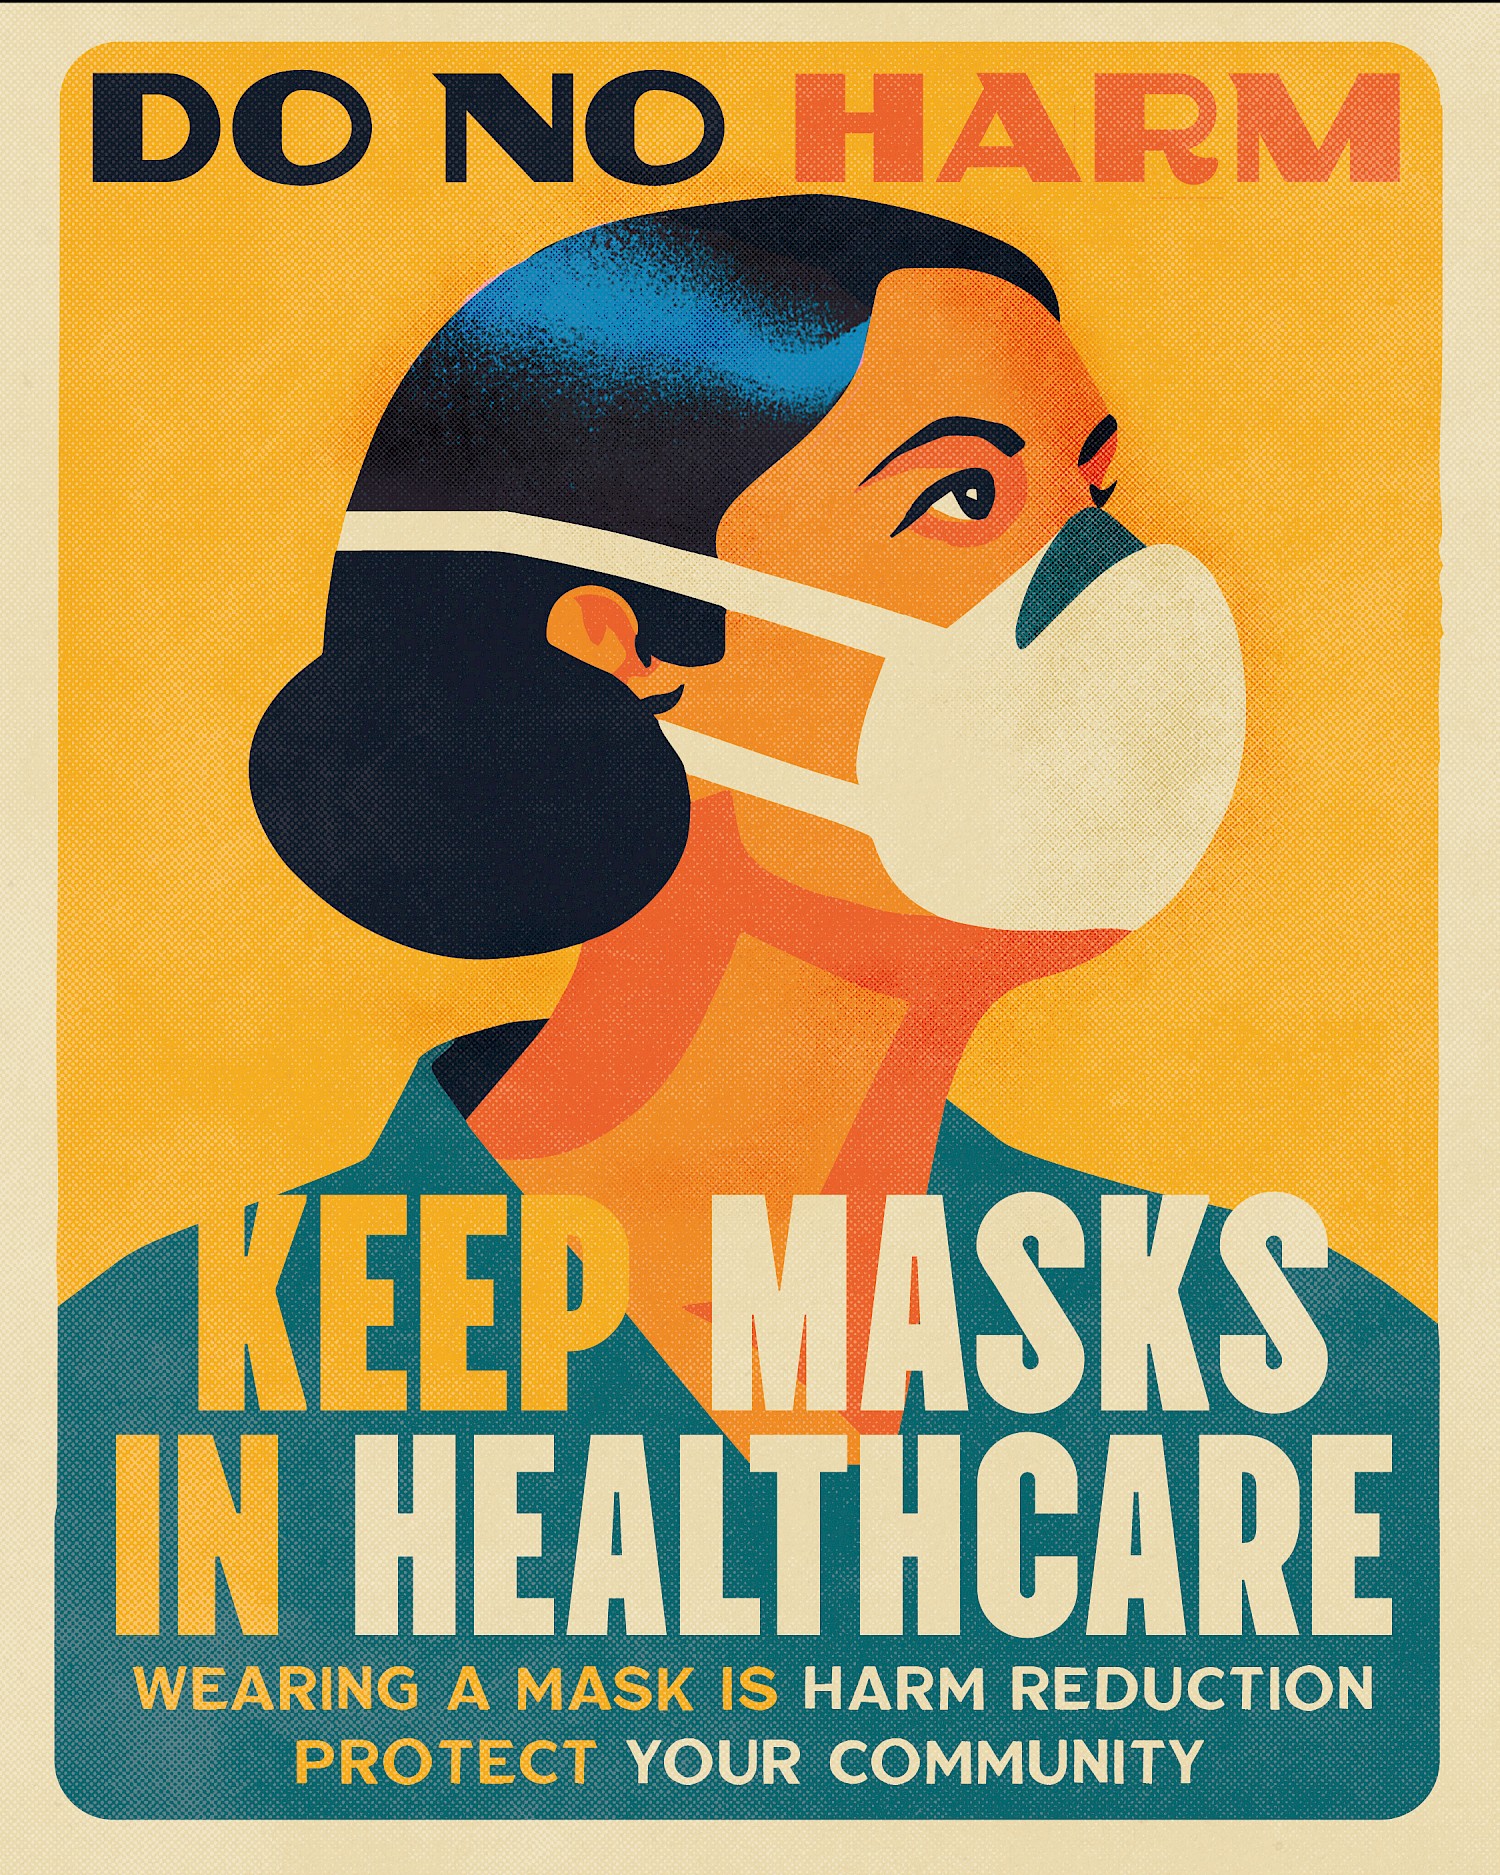 poster of a woman wearing a mask on a yellow background with text at the top 'DO NO HARM' and text at the bottom 'Keep Masks in Healthcare. Wearing a mask is harm reduction. Protect your community.'